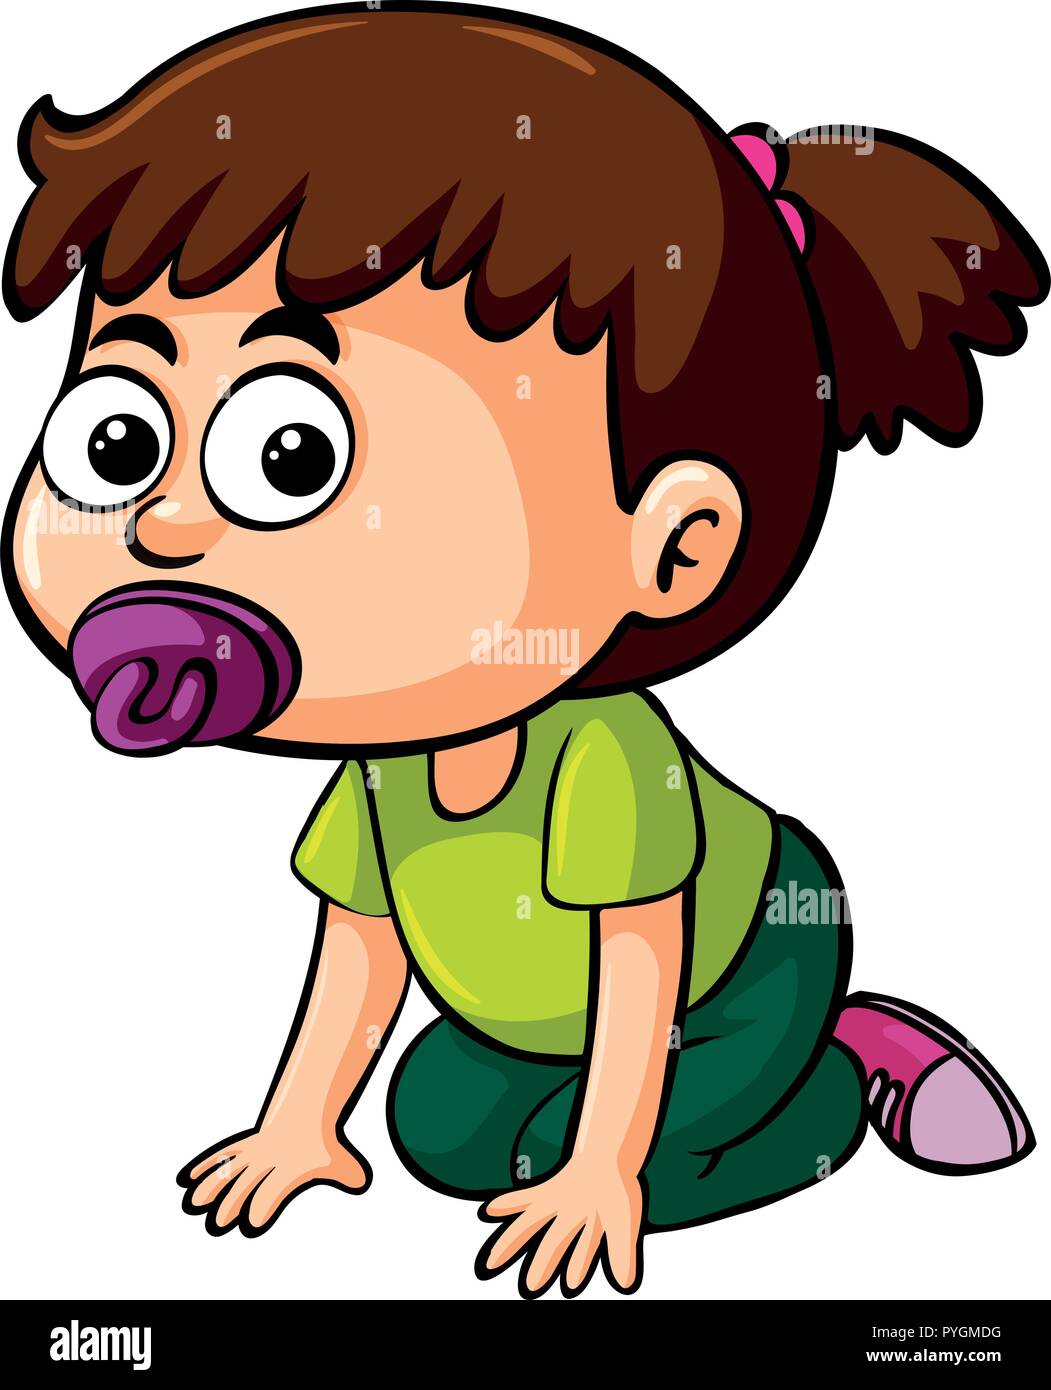 Girl toddler with pacifier illustration Stock Vector